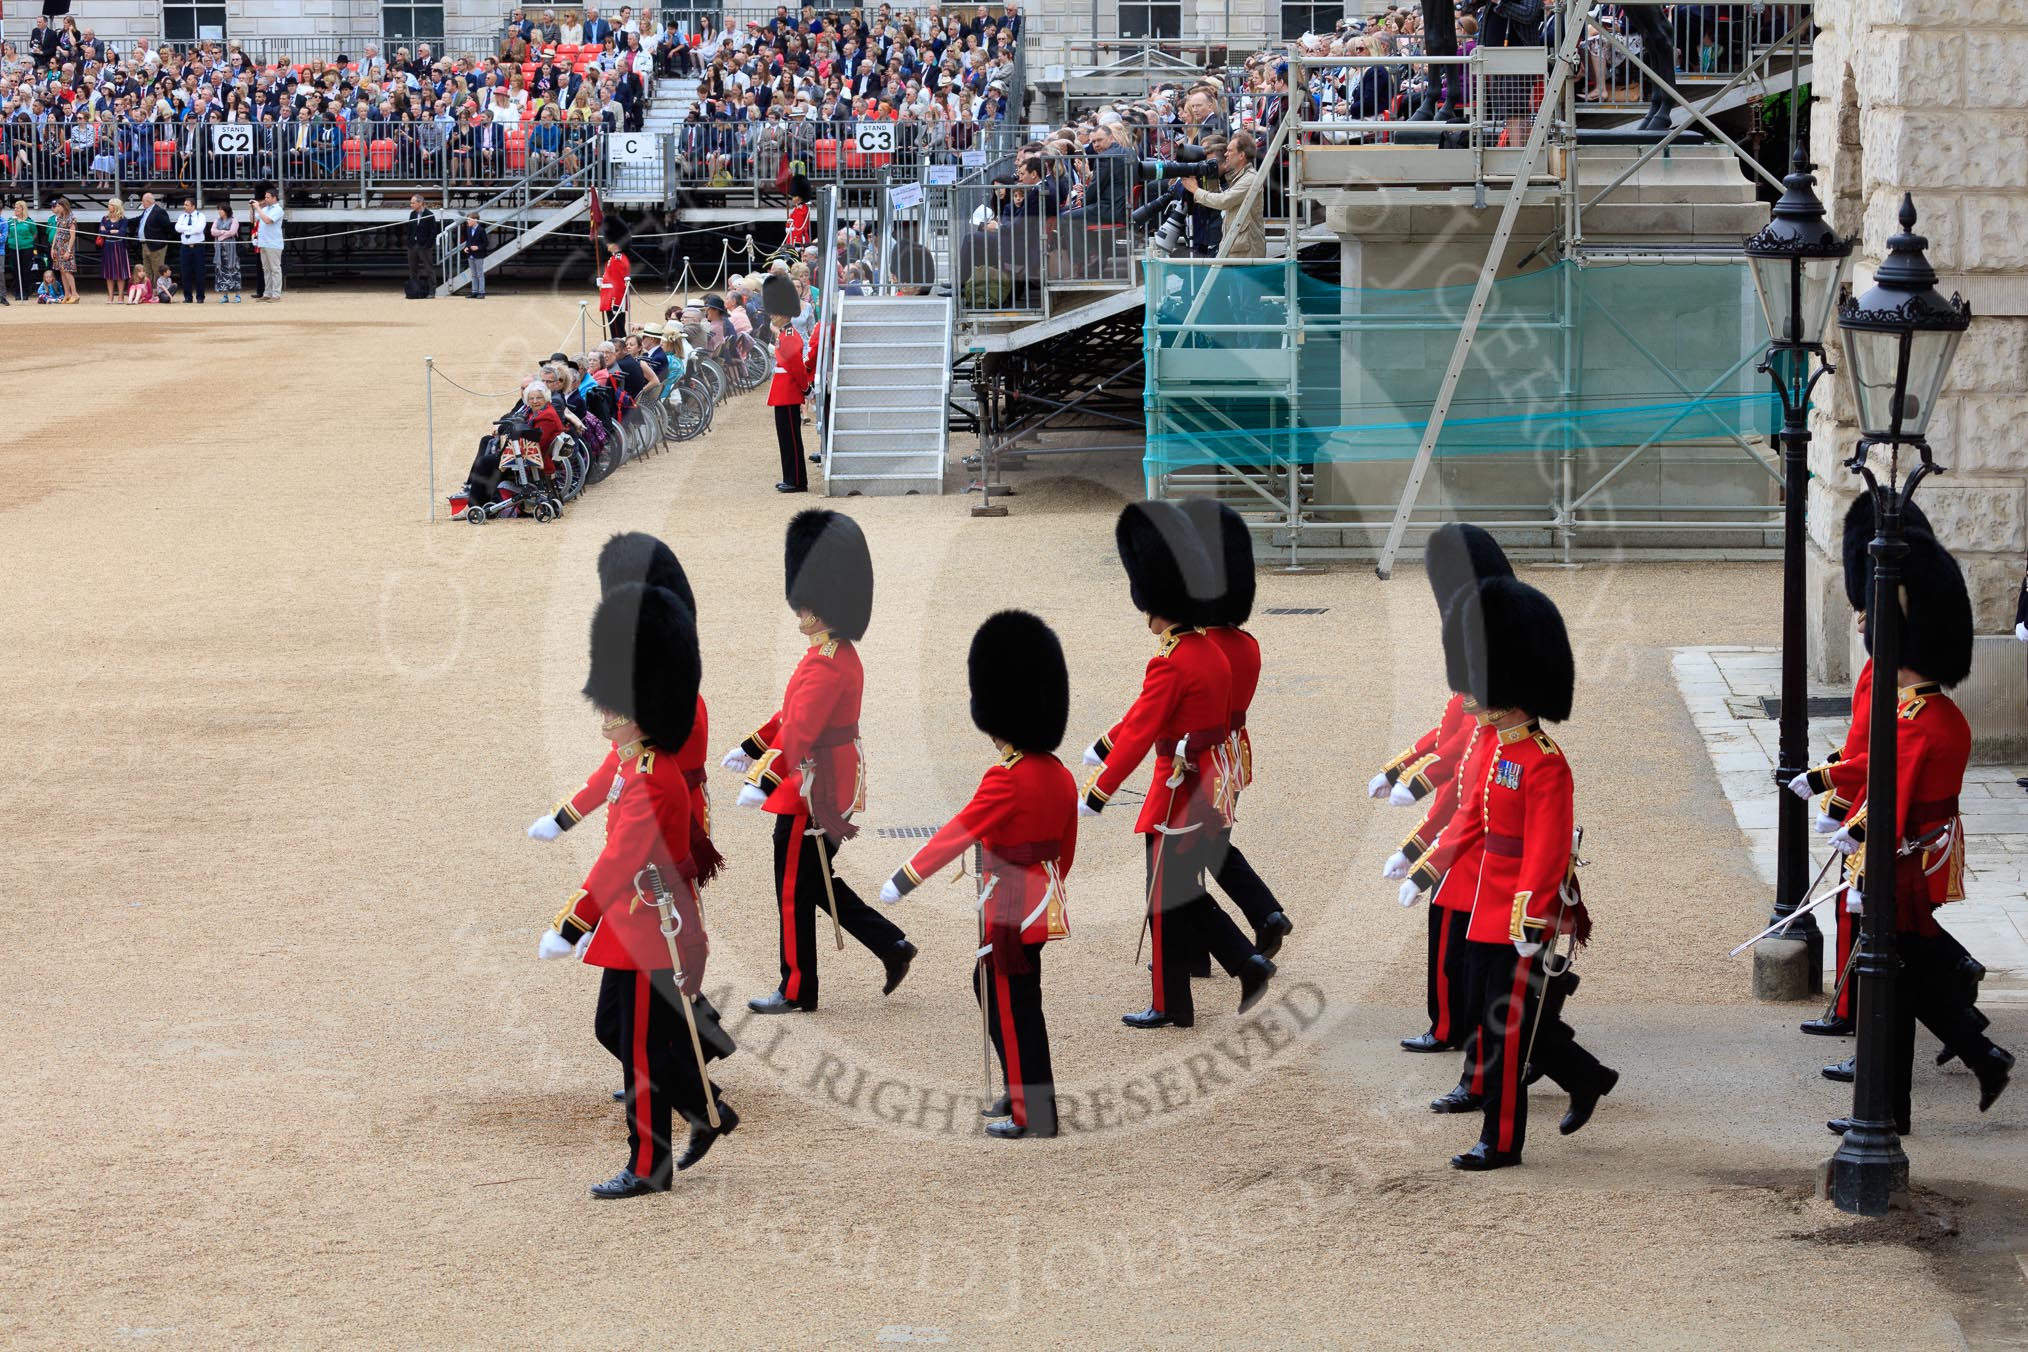 during The Colonel's Review {iptcyear4} (final rehearsal for Trooping the Colour, The Queen's Birthday Parade)  at Horse Guards Parade, Westminster, London, 2 June 2018, 10:38.